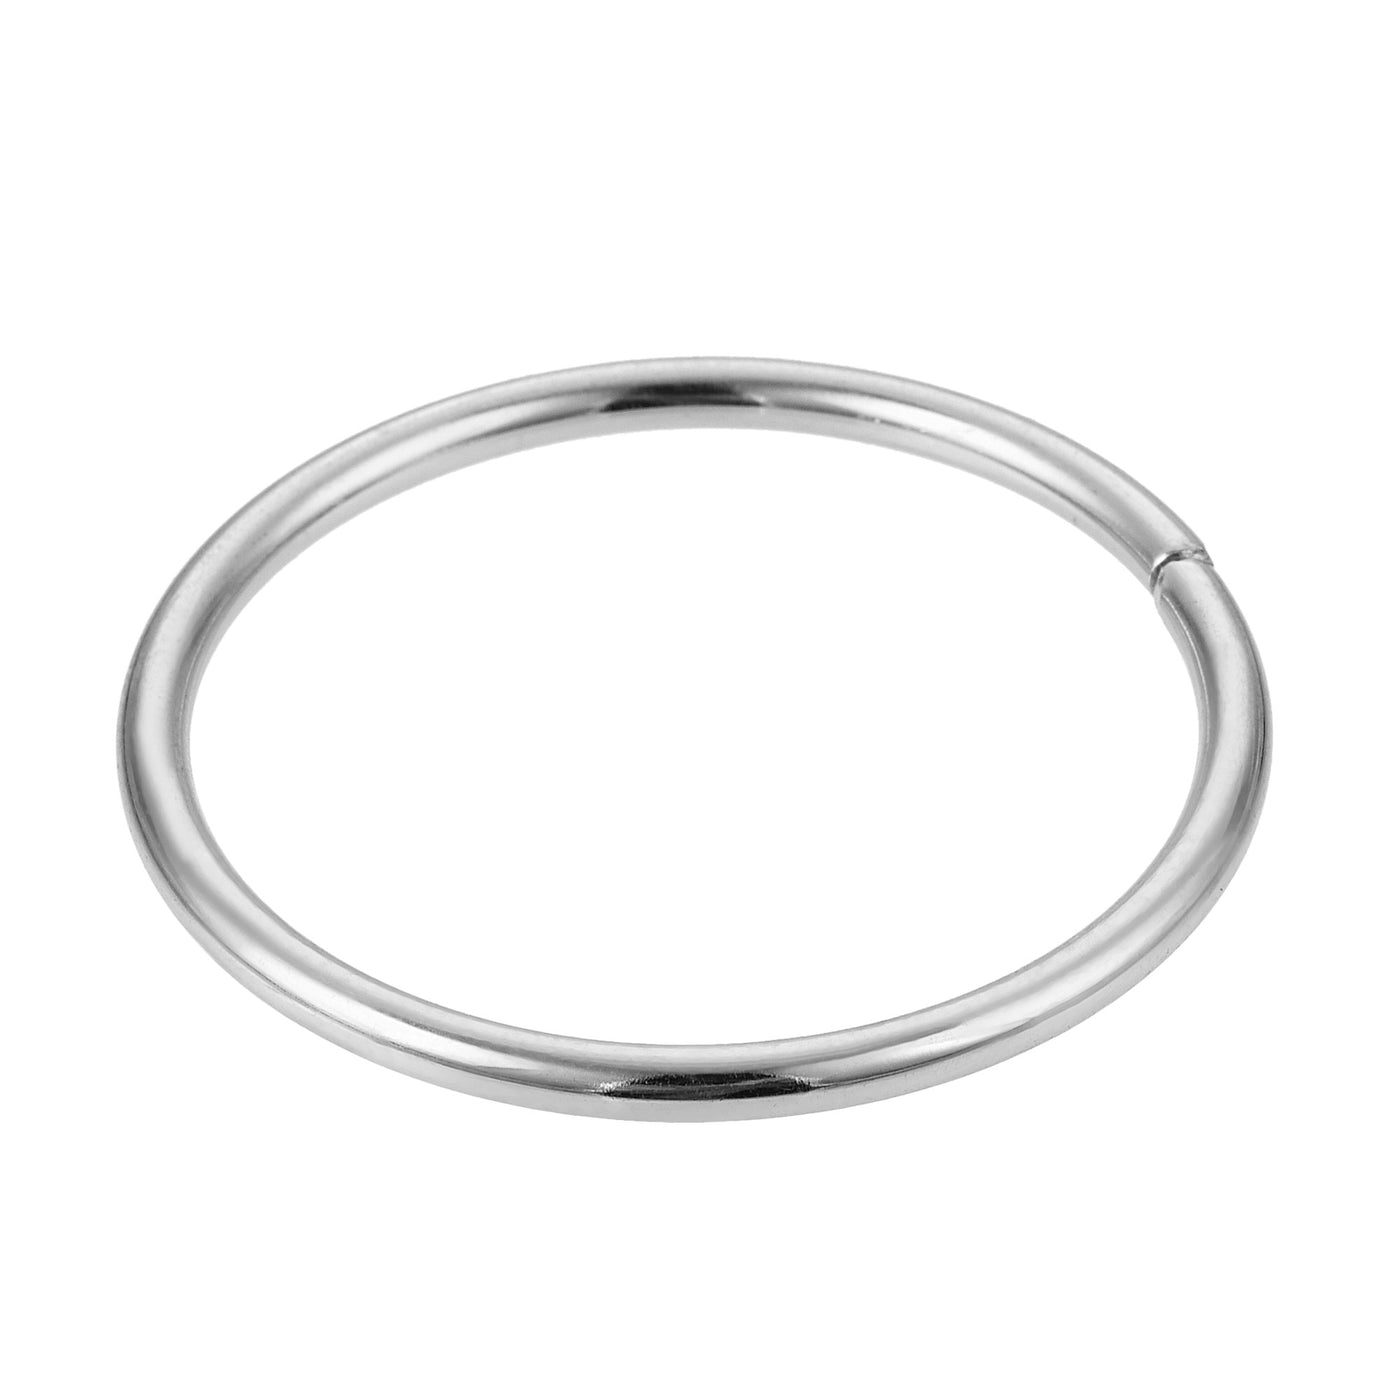 uxcell Uxcell 40mm Metal O Rings Non-Welded for Straps Bags Belts DIY Silver Tone 20pcs